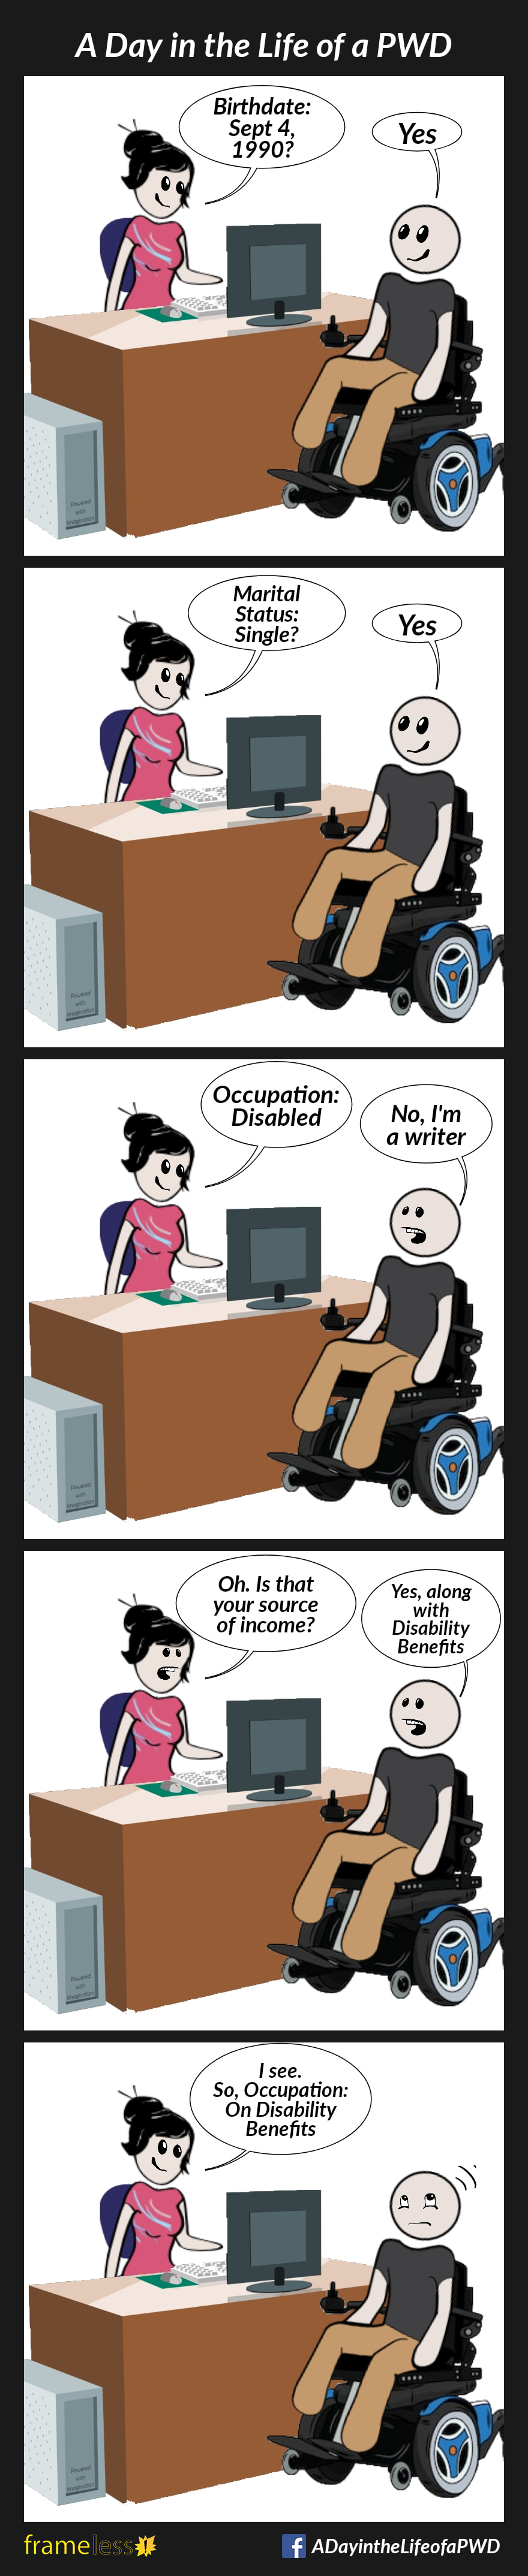 COMIC STRIP 
A Day in the Life of a PWD (Person With a Disability) 

Frame 1:
A man is sitting in an office talking with a social worker.
SOCIAL WORKER: Birthdate: Sept 4, 1990?
MAN: Yes

Frame 2:
SOCIAL WORKER: Marital Status: Single?
MAN: Yes

Frame 3:
SOCIAL WORKER: Occupation: Disabled
MAN: No, I'm a writer.

Frame 4:
SOCIAL WORKER: Oh, is that your source of income?
MAN: Yes, along with Disability Benefits 

Frame 5:
SOCIAL WORKER: I see. So, Occupation: On Disability Benefits 
The man rolls his eyes.